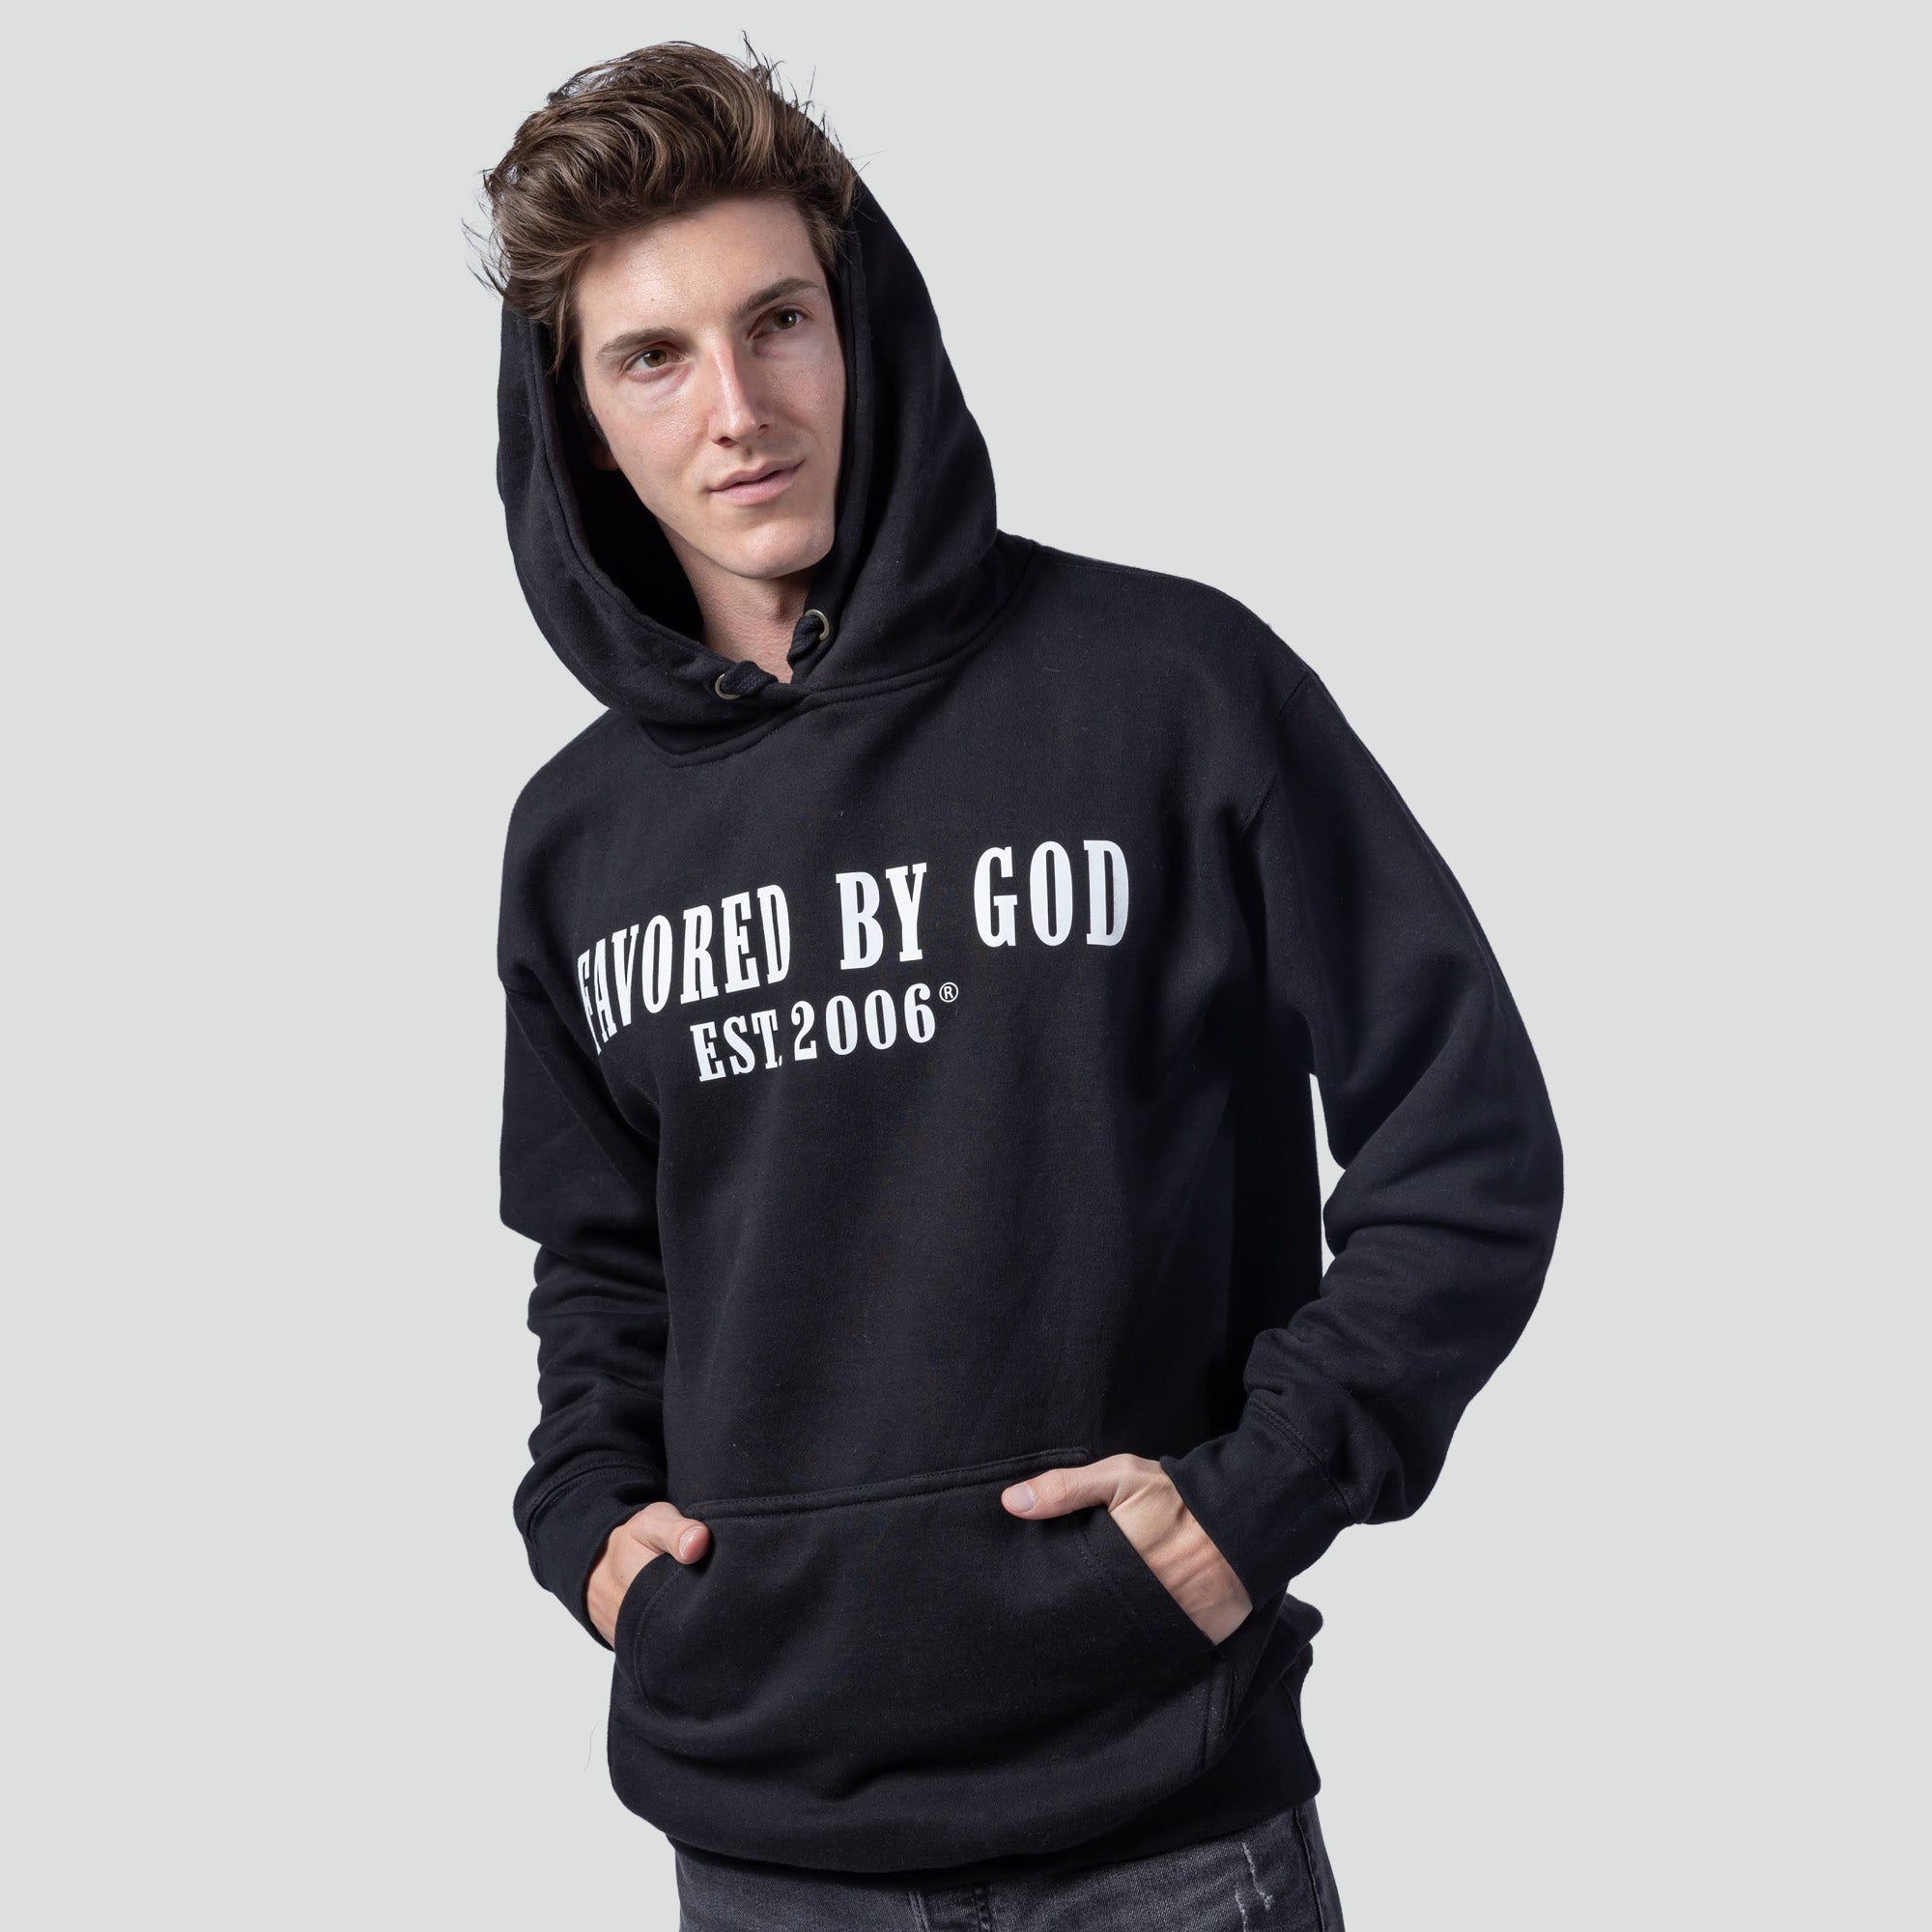 Favored By God Est. 2006 Hoodie